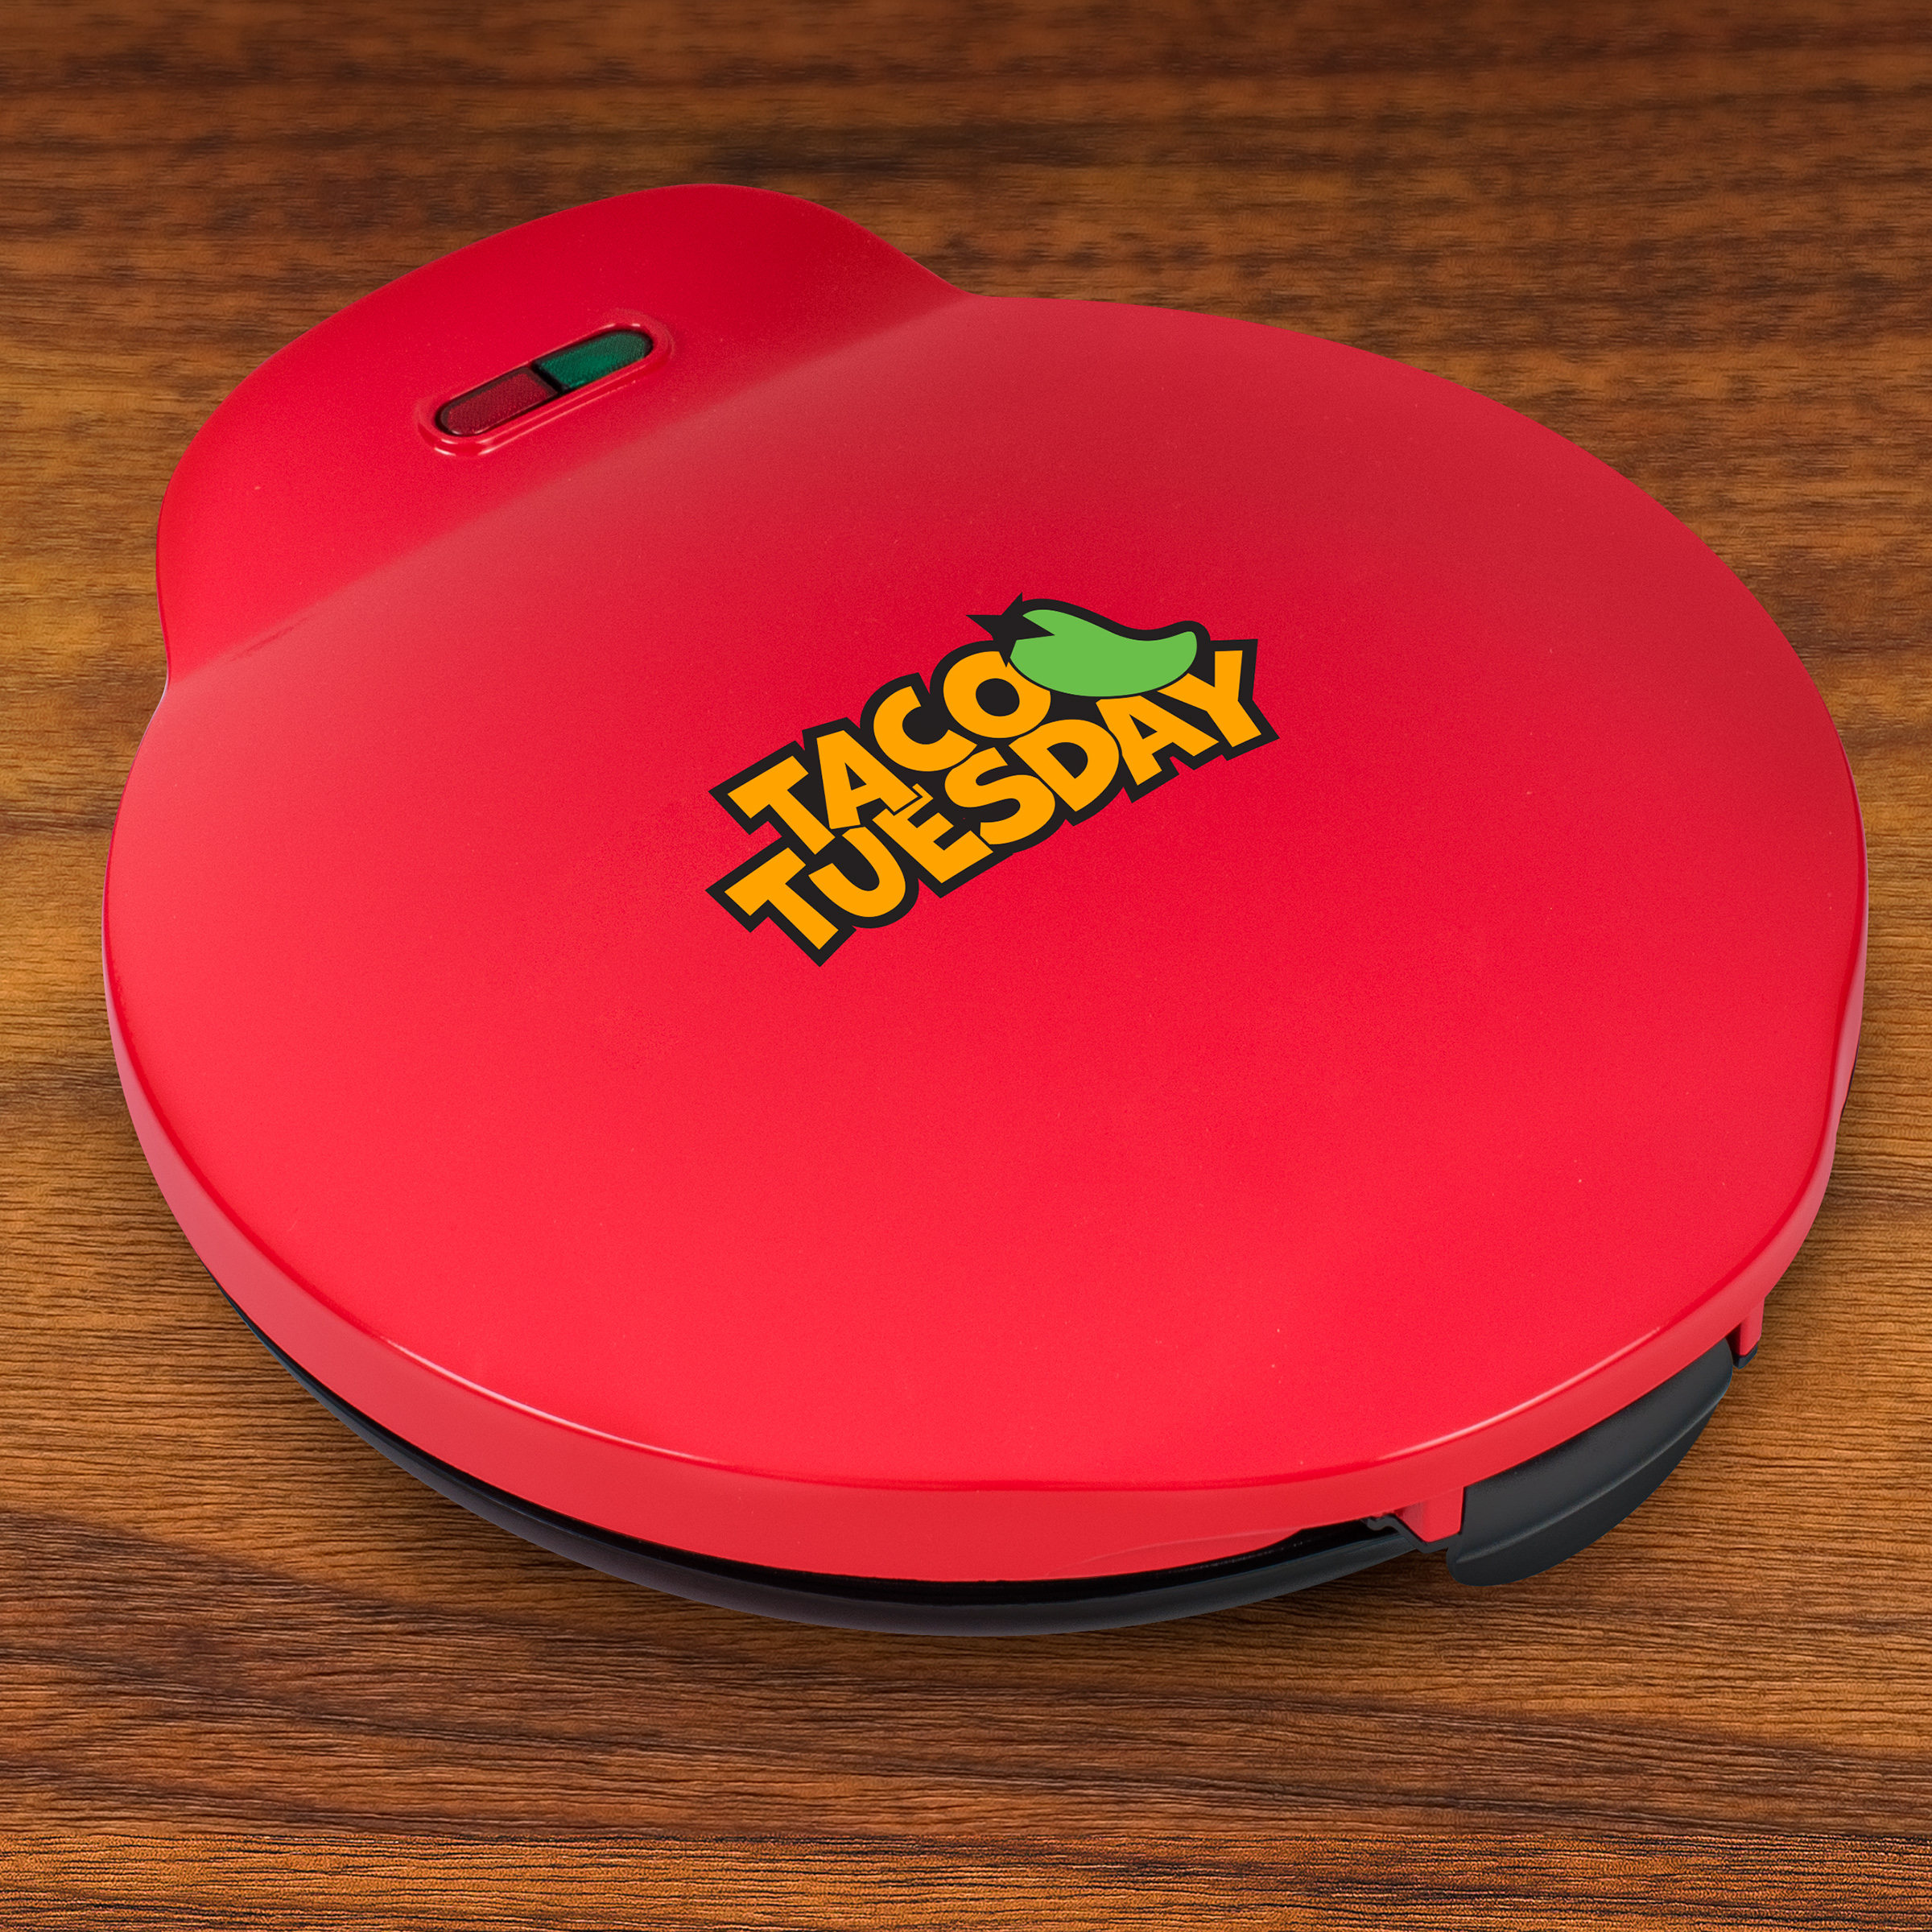 Taco Tuesday 6-Wedge Electric Quesadilla Maker with Extra Stuffing Latch, Red 10” - image 3 of 6